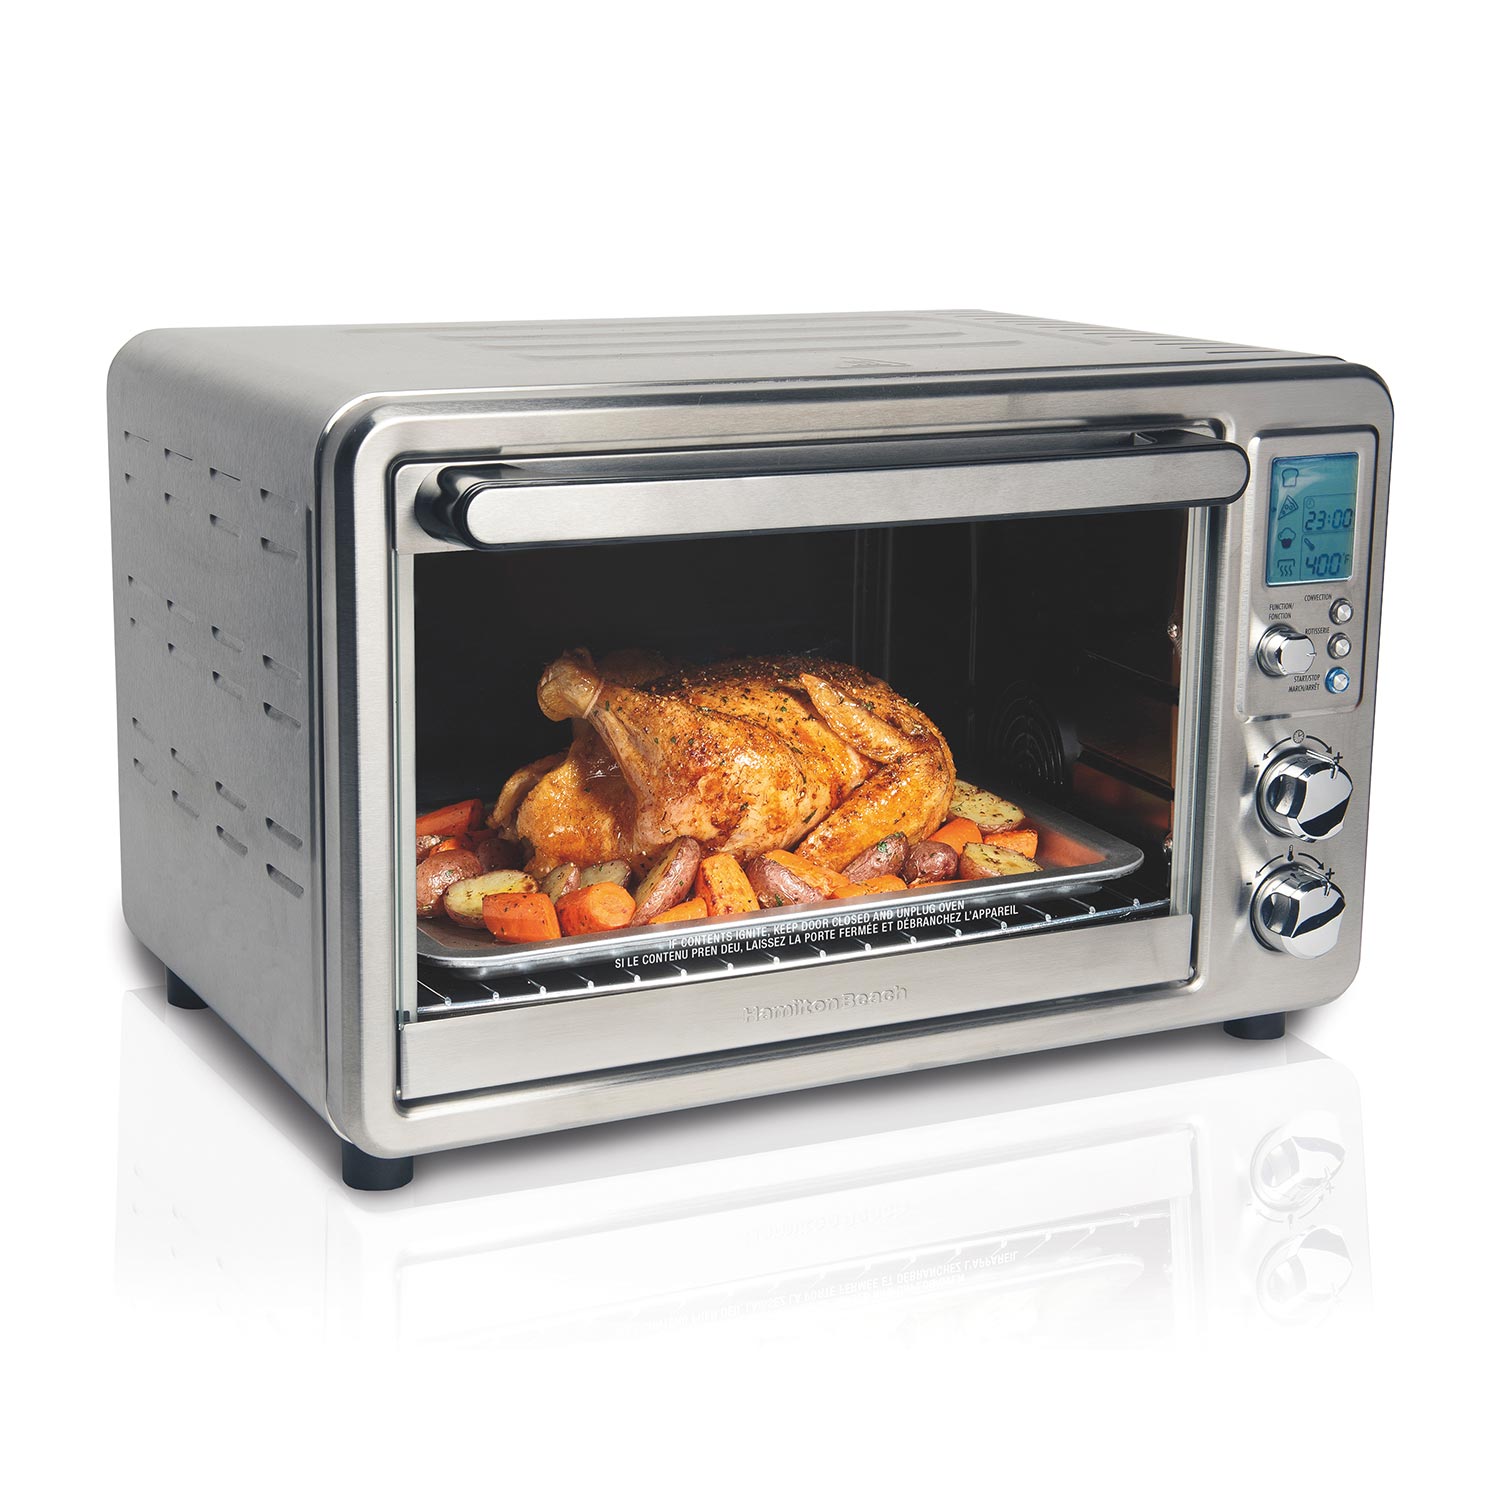 Digital & Convection Toaster Oven with Rotisserie, Stainless Steel (31190C)